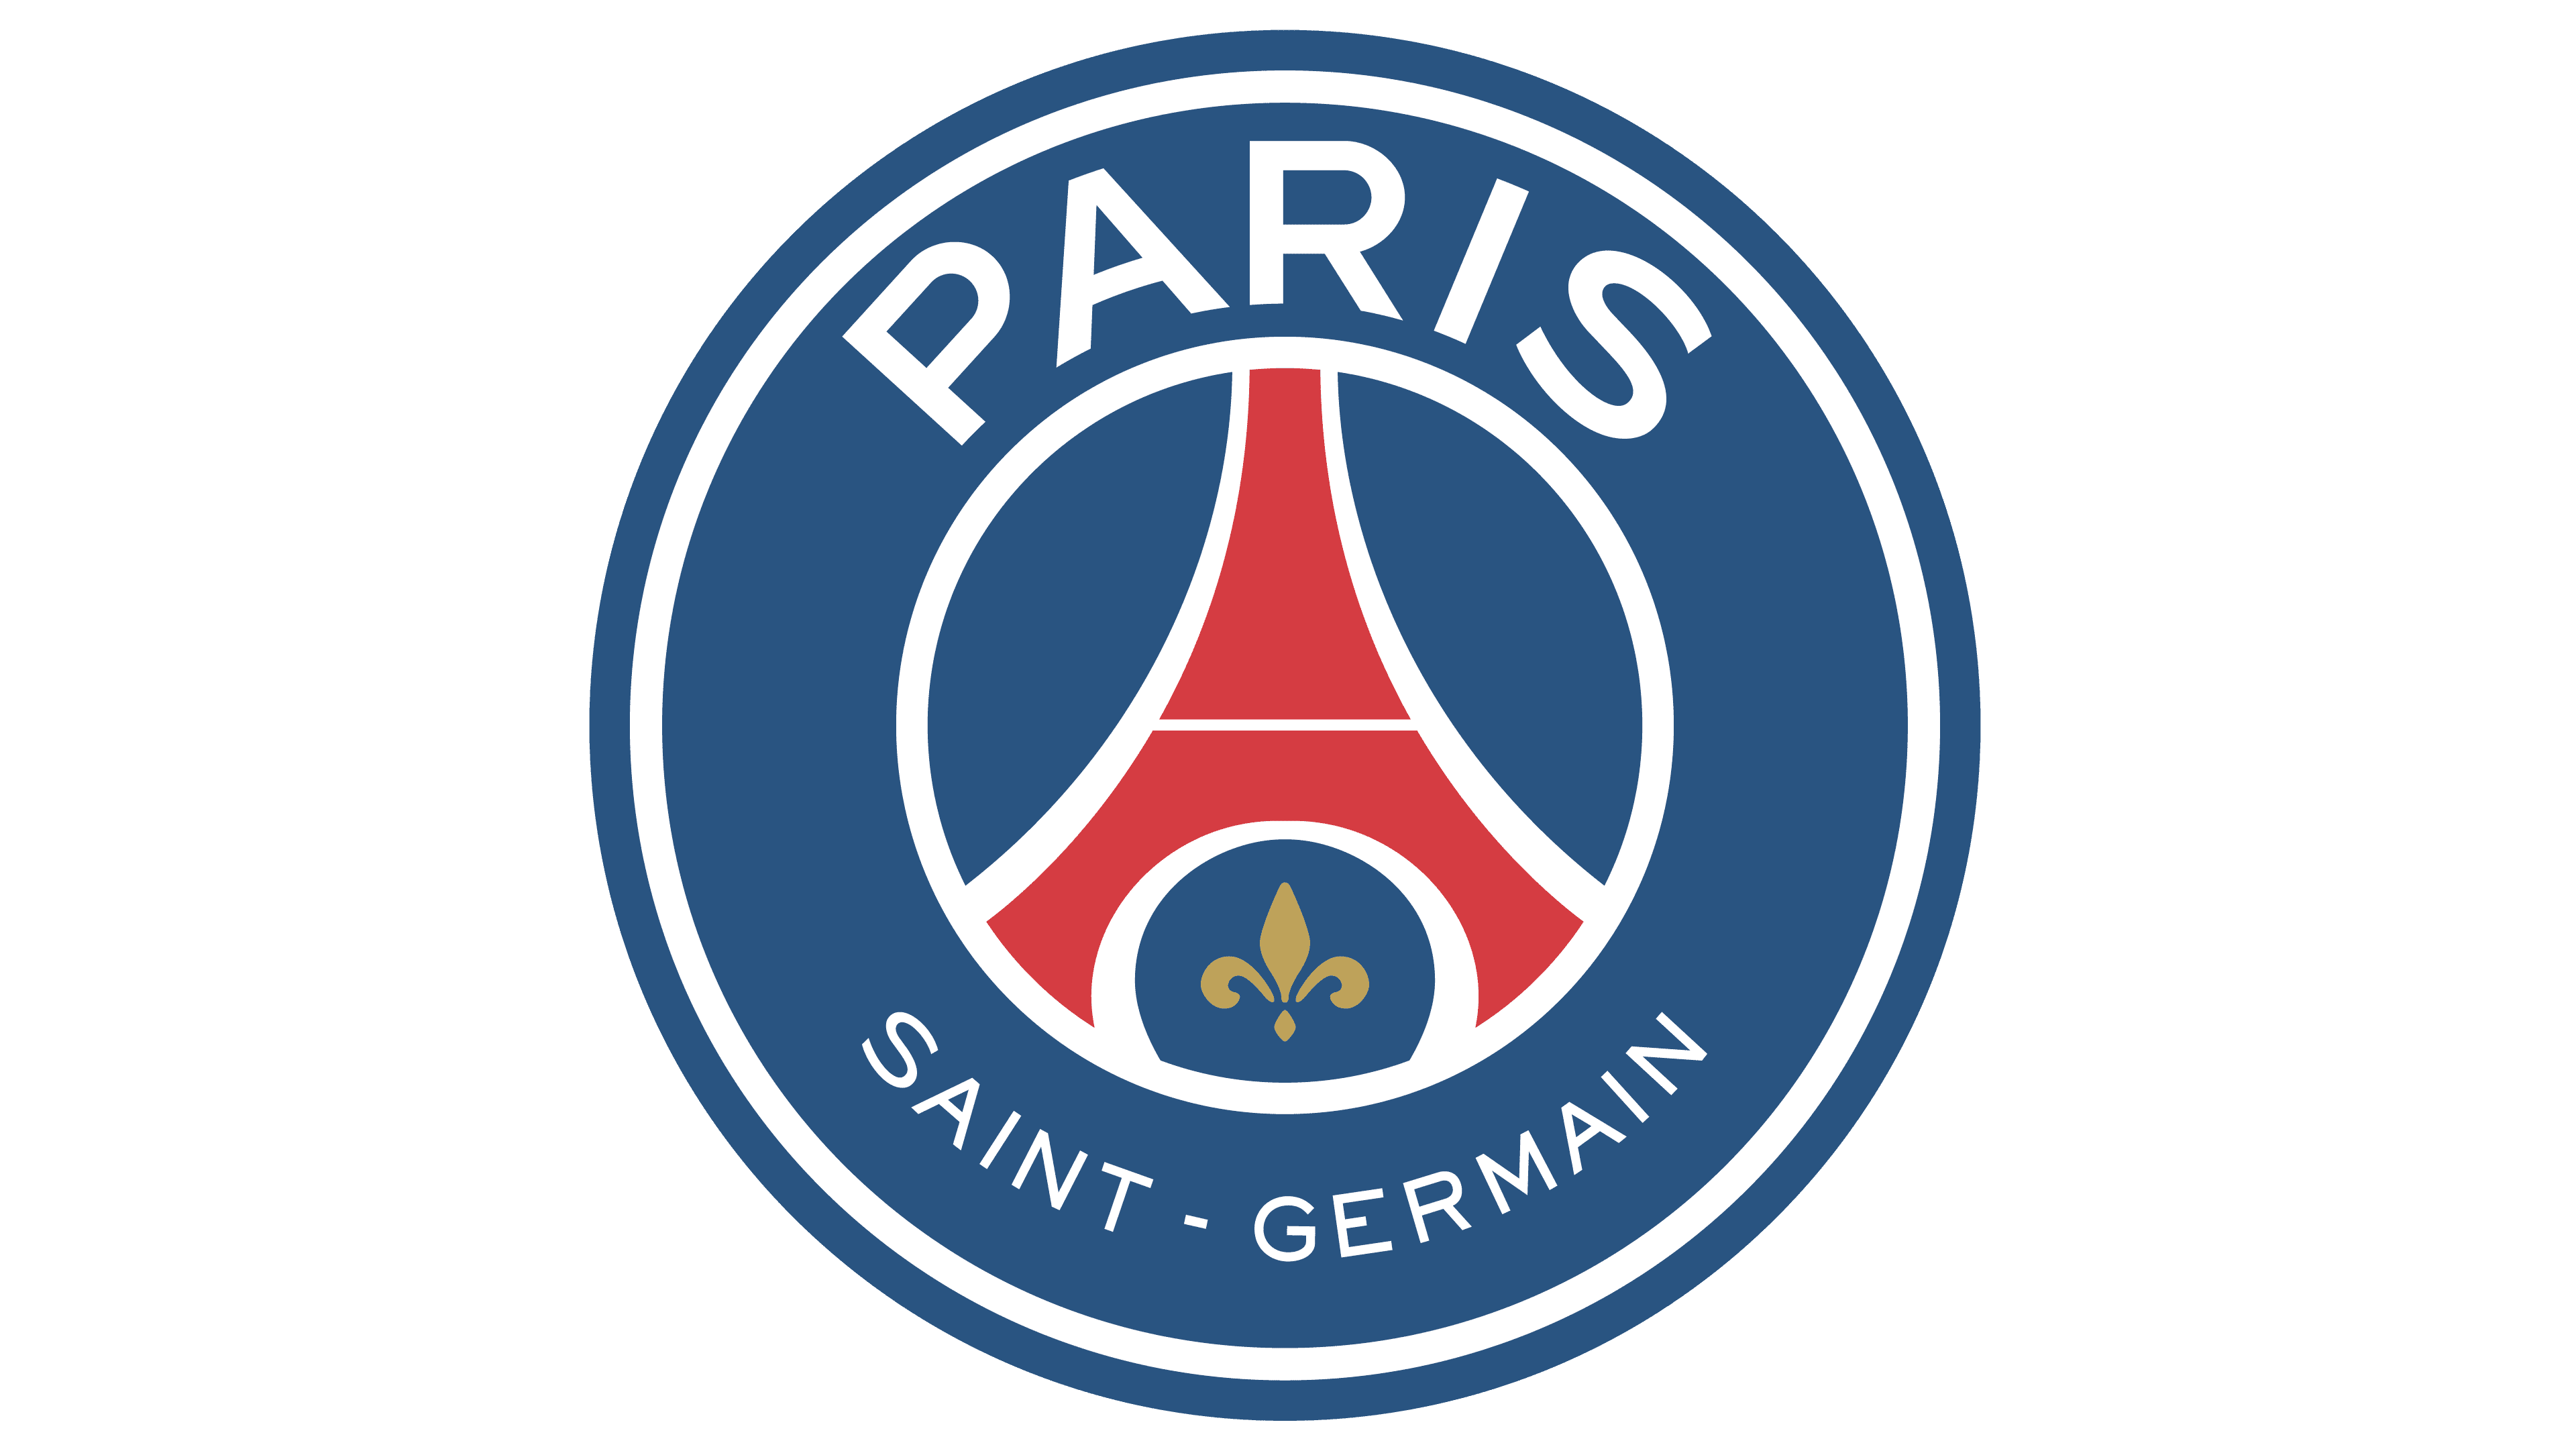 Psg Logo The Most Famous Brands And Company Logos In The World